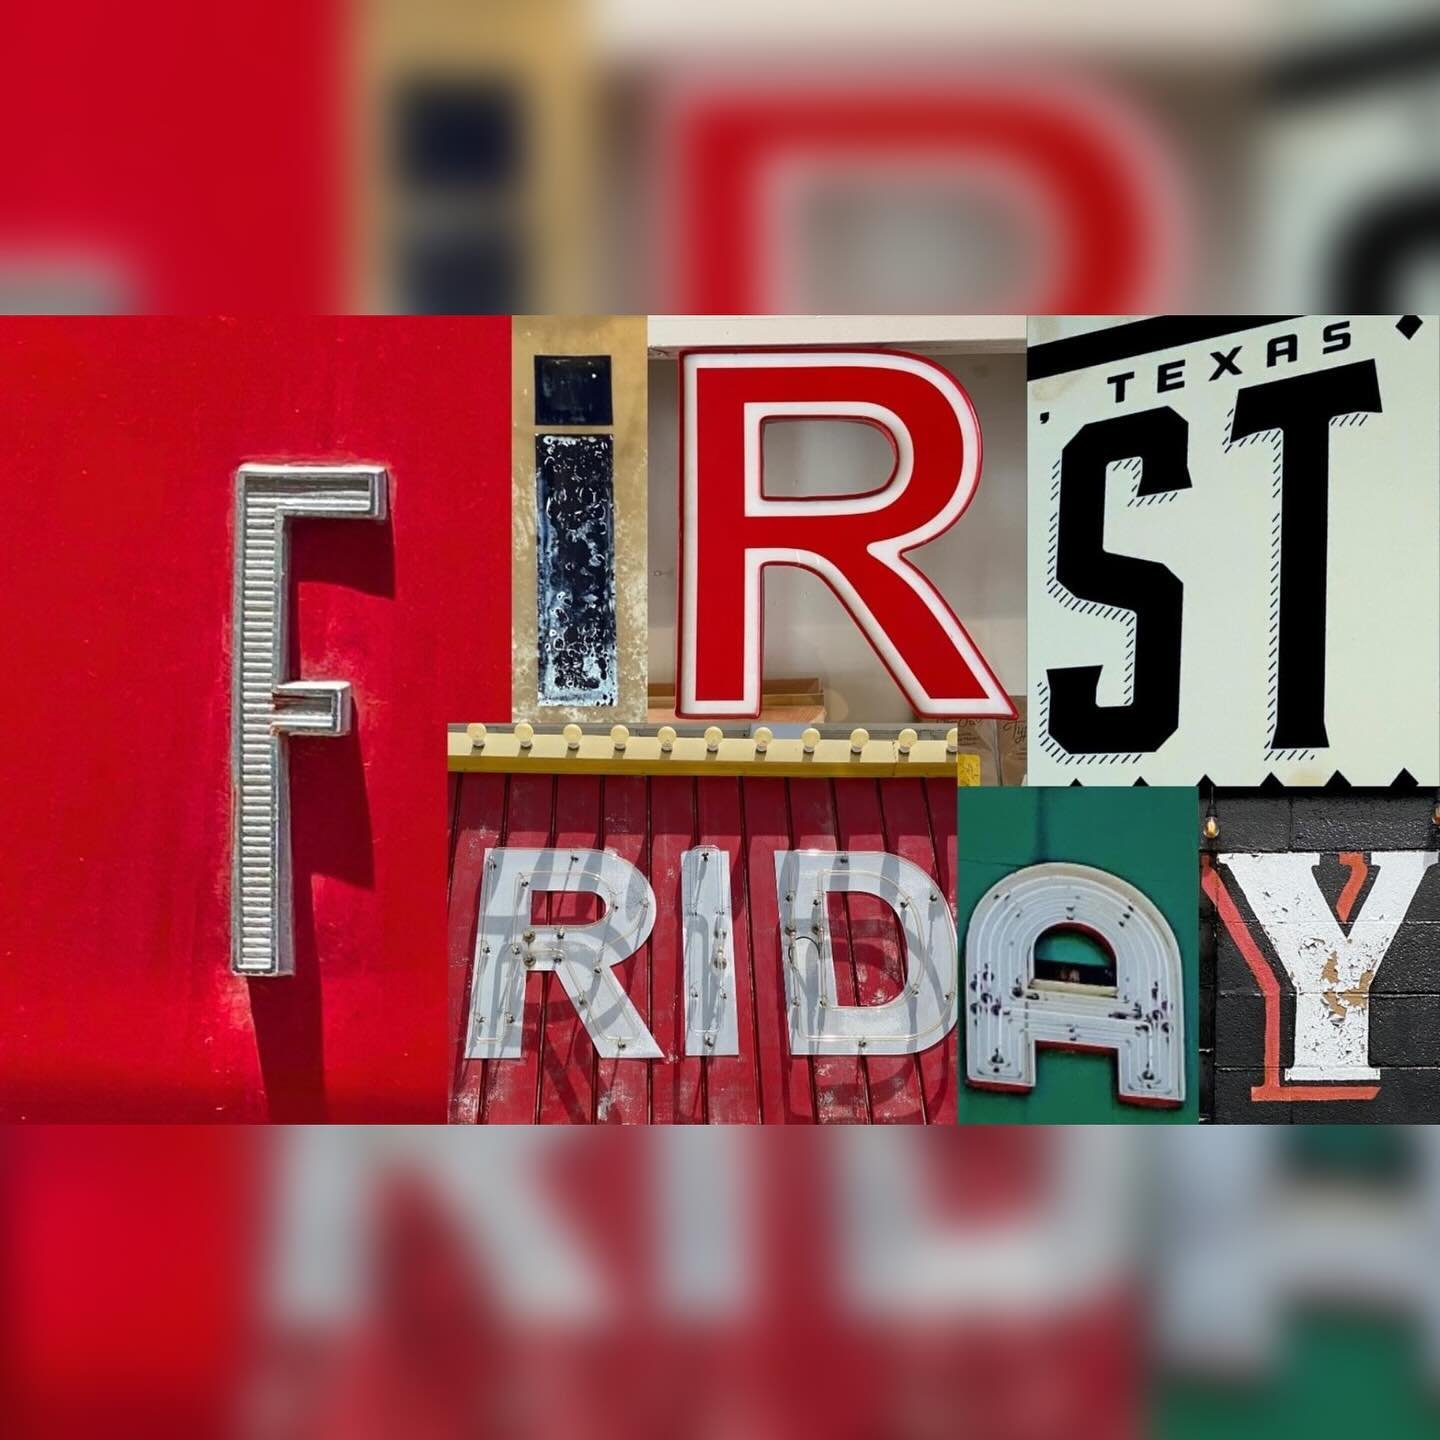 Coming June 7, 2024, a TWIST on our Art Market Concept. 👀

Get ready for our new invitational &ldquo;First Friday Made In Denton&rdquo; Art Market and Exhibition Event! 

Stay tuned to see just who we&rsquo;ve invited! 🎨👨&zwj;🎨🥳

#DentonEvents #